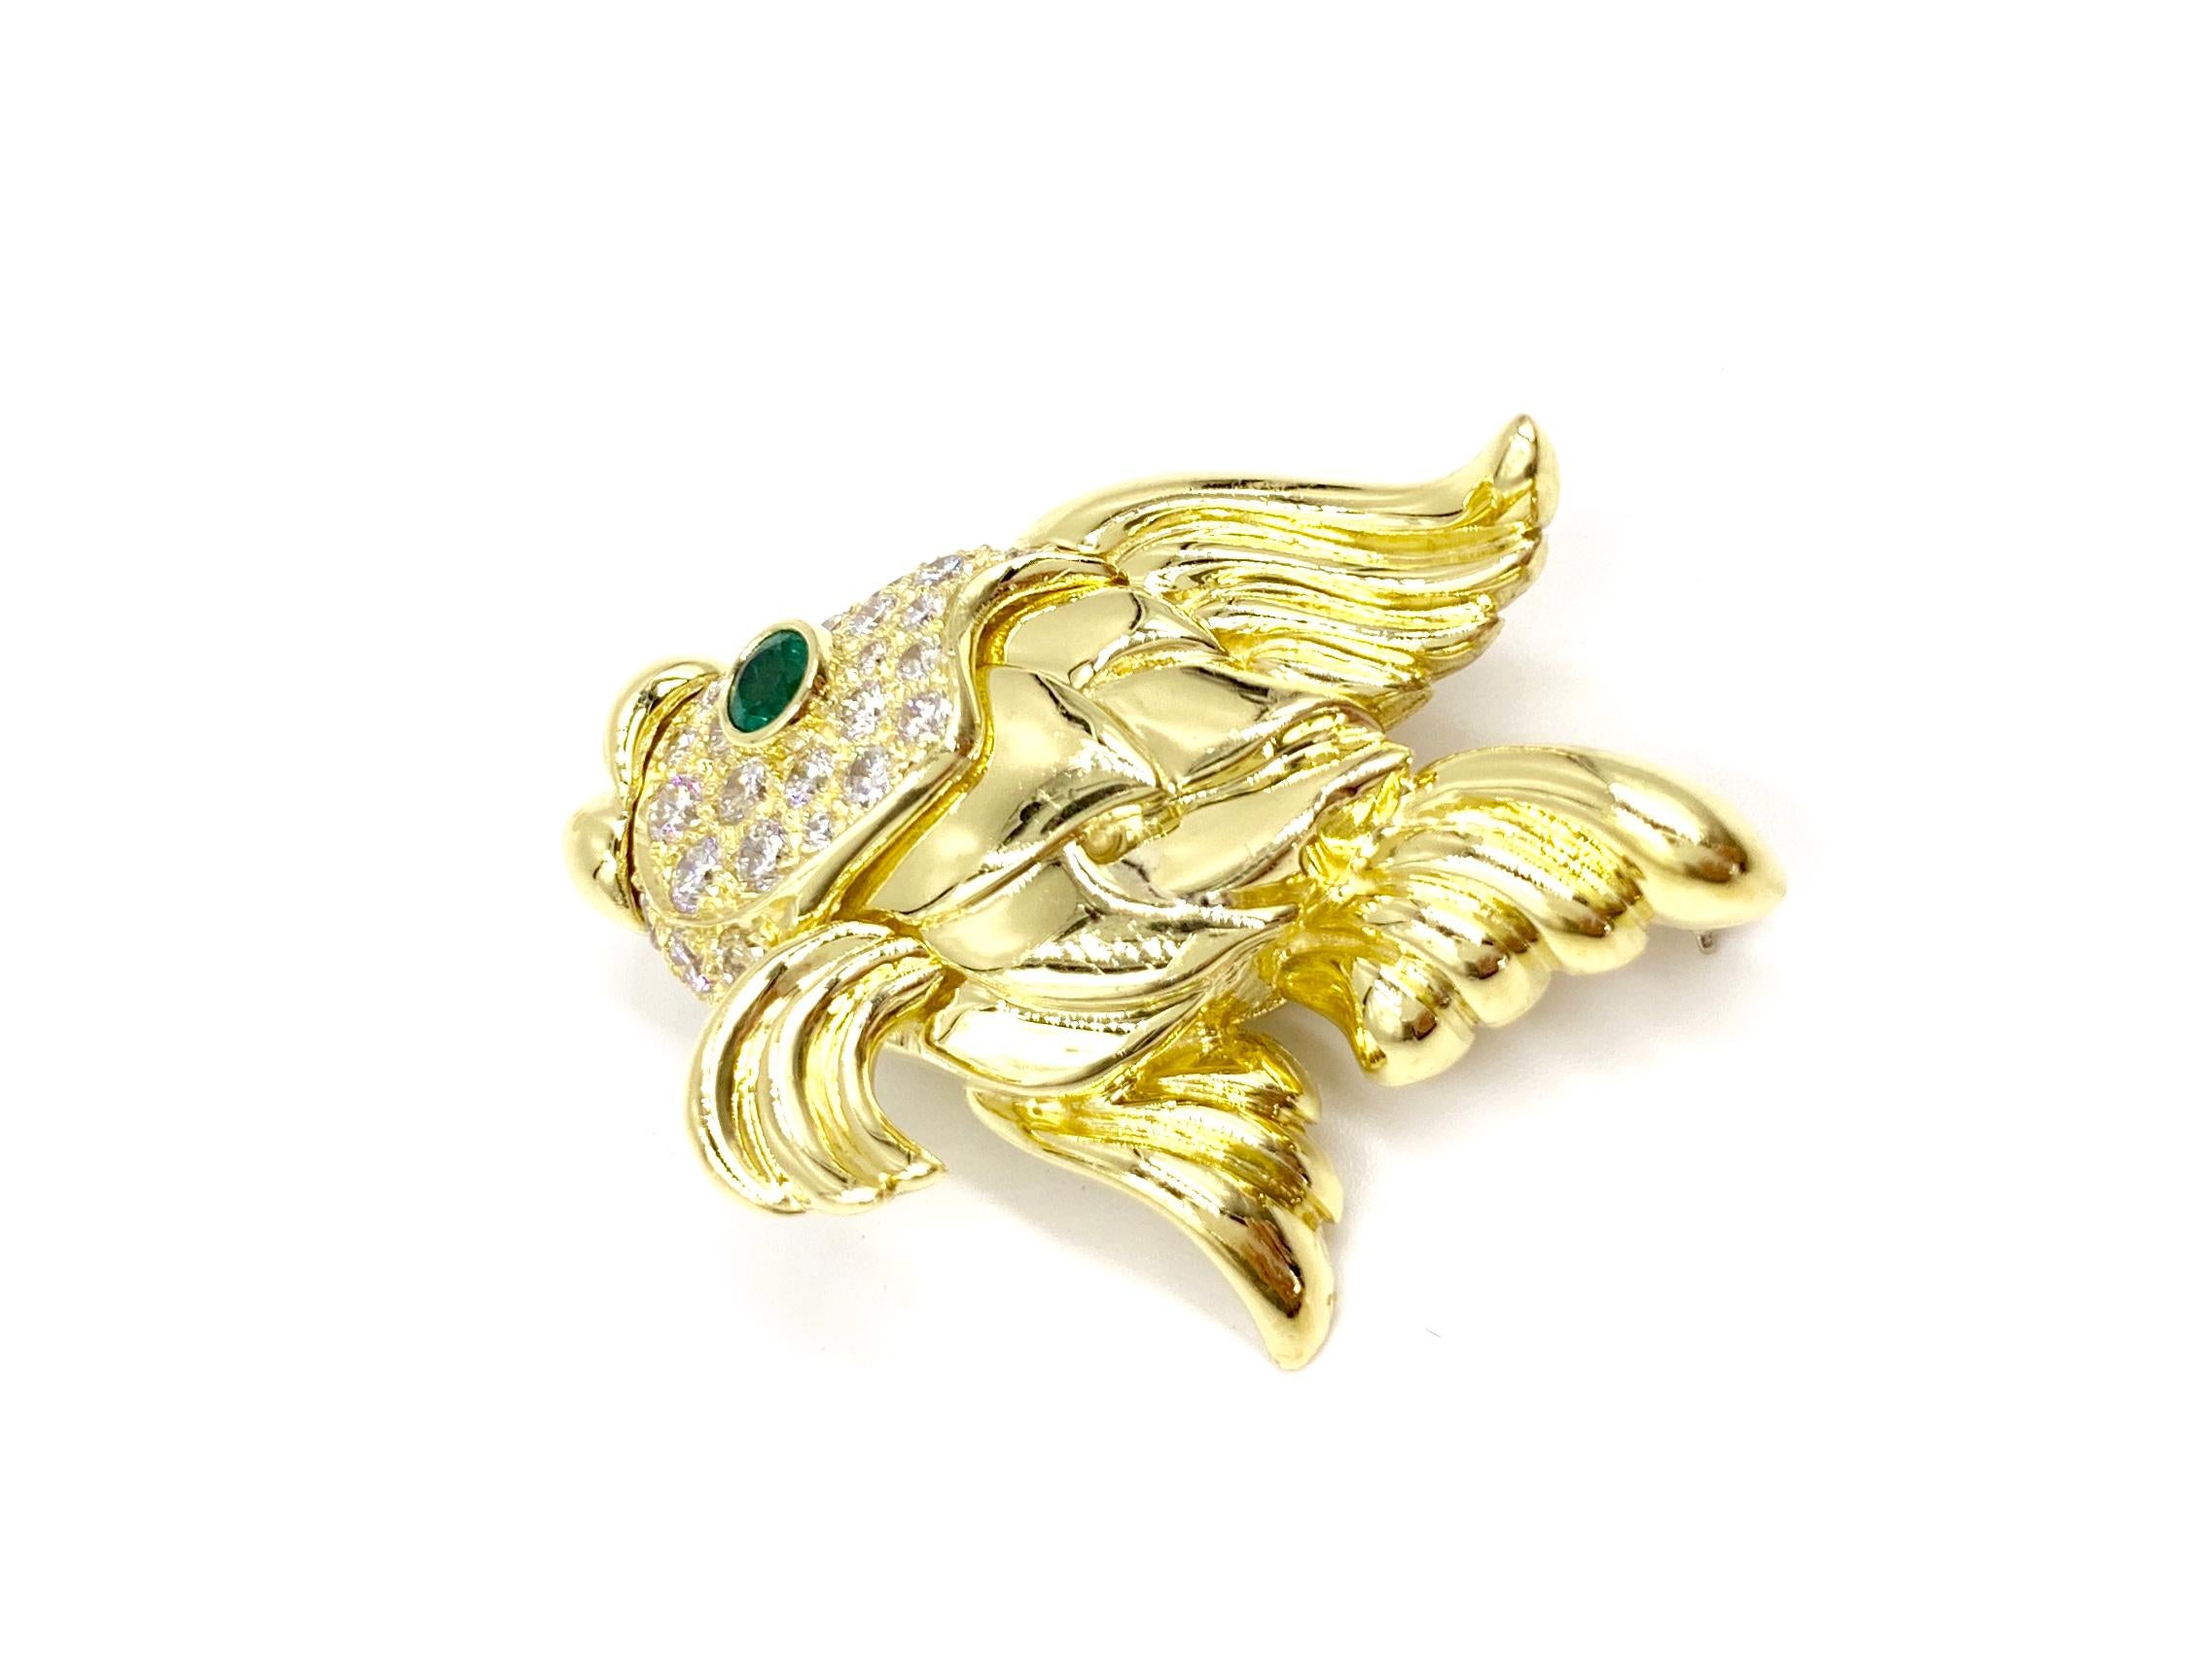 Made with superior quality by fine jewelry designer, Jeff Cooper. This substantial polished 18 karat yellow gold puckering fish features 1.42 carats of high quality round brilliant white diamonds and a single .18 carat round vivid green emerald.